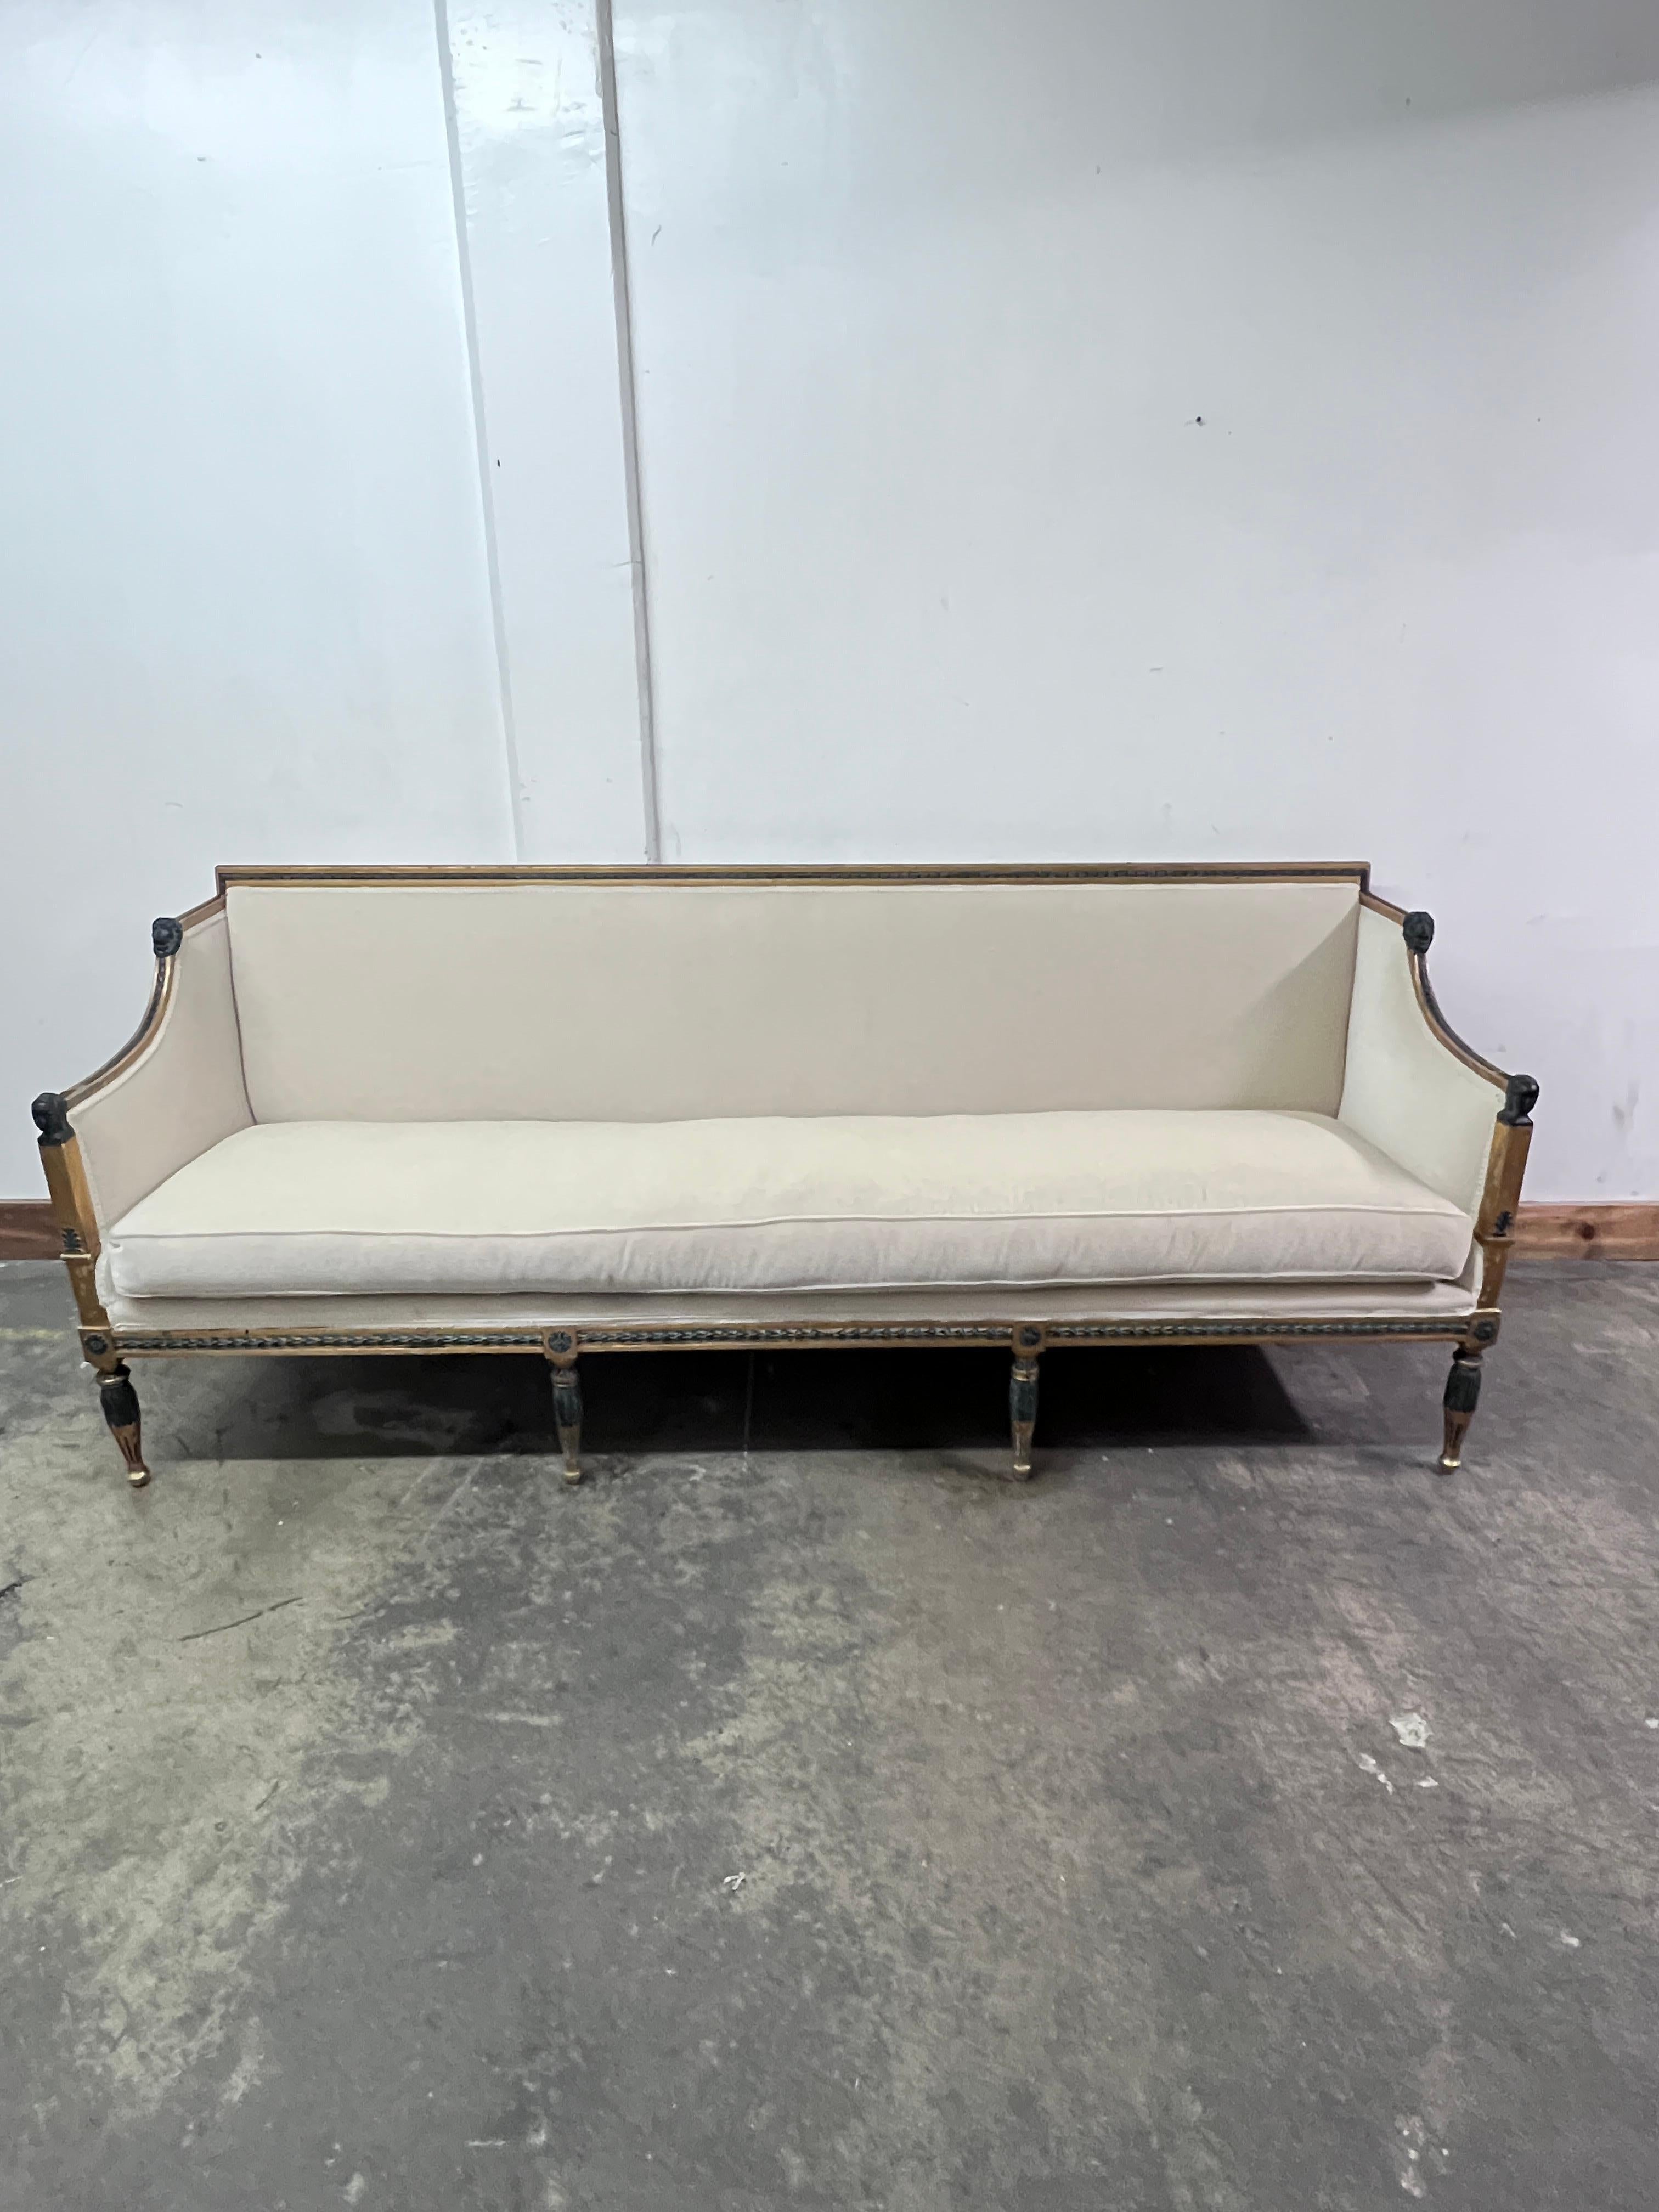 Fine 19th century late Gustavian sofa inspired by the Roman Empire and ancient Egypt. Hand Crafted with Gold Leaf Wood Trimmed Hand-Carved Rosette Details.  The removable back allows for easy reupholstery and for the sofa to convert to a window